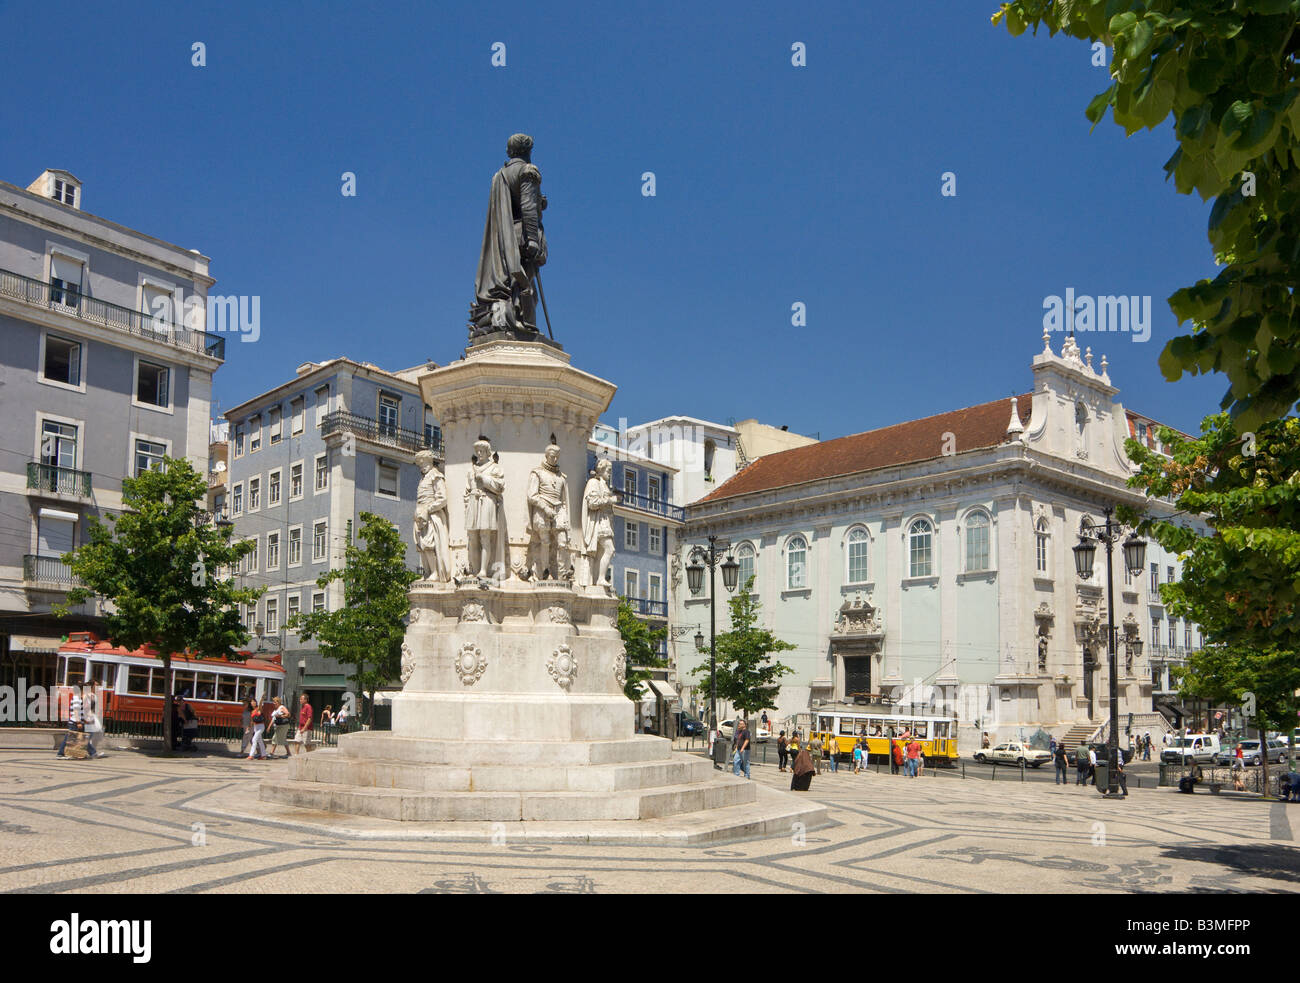 Portugal Lisbon the Largo Luis de Camoes square statue of the poet and trams in the Bairro Alto district Stock Photo